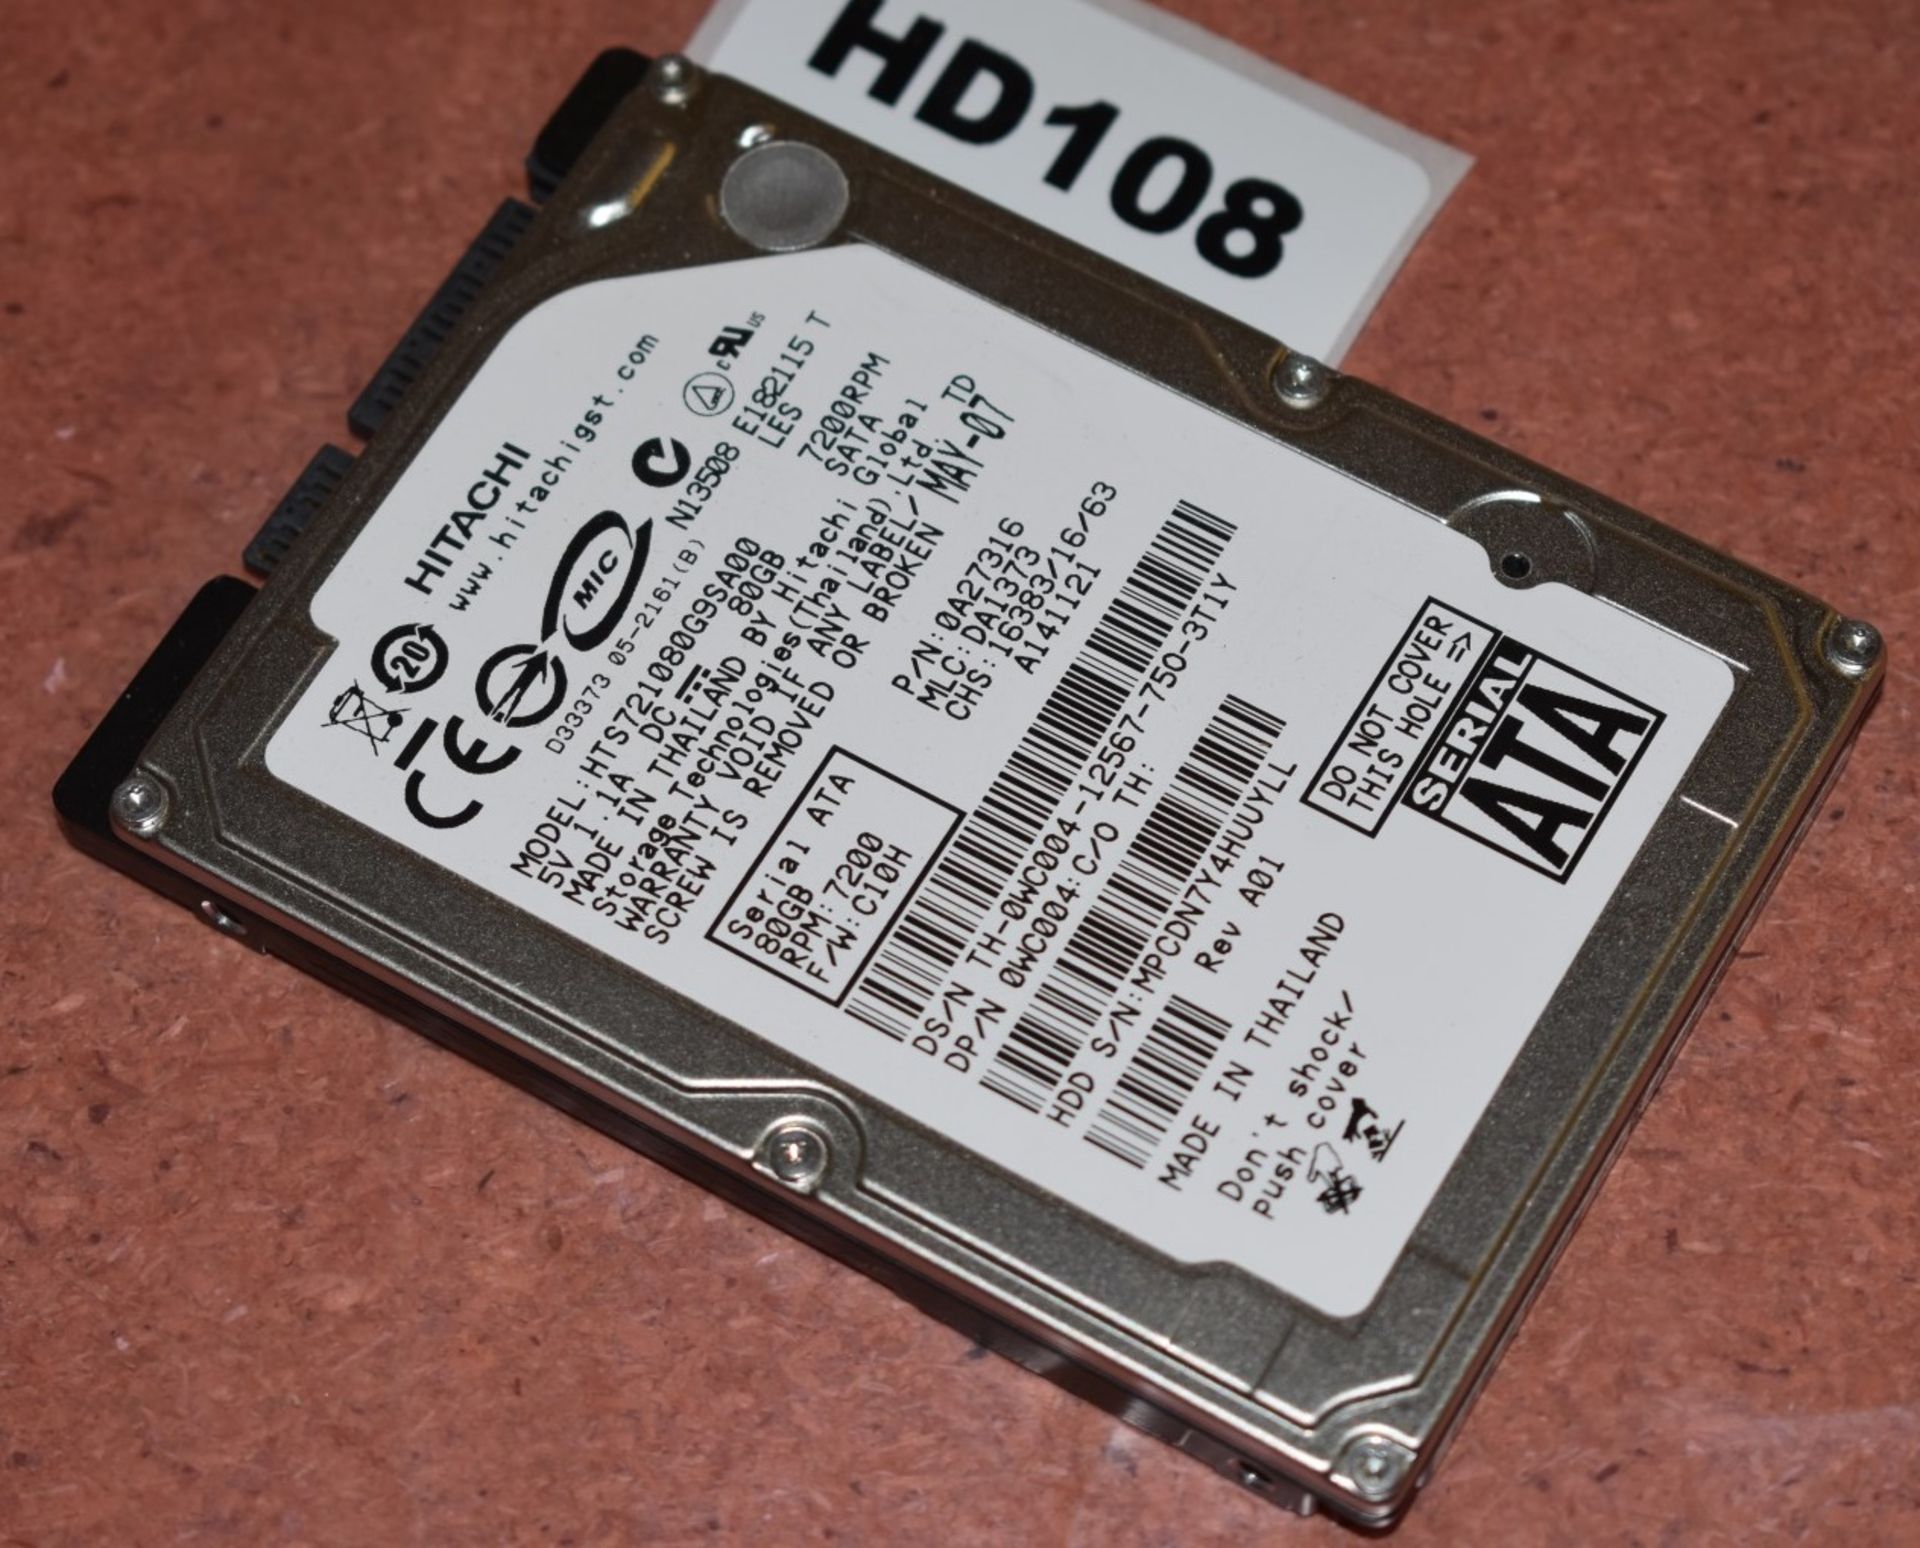 1 x Hitachi 80gb 2.5 Inch SATA Hard Drive - Tested and Formatted - HD108 - CL011 - Location: